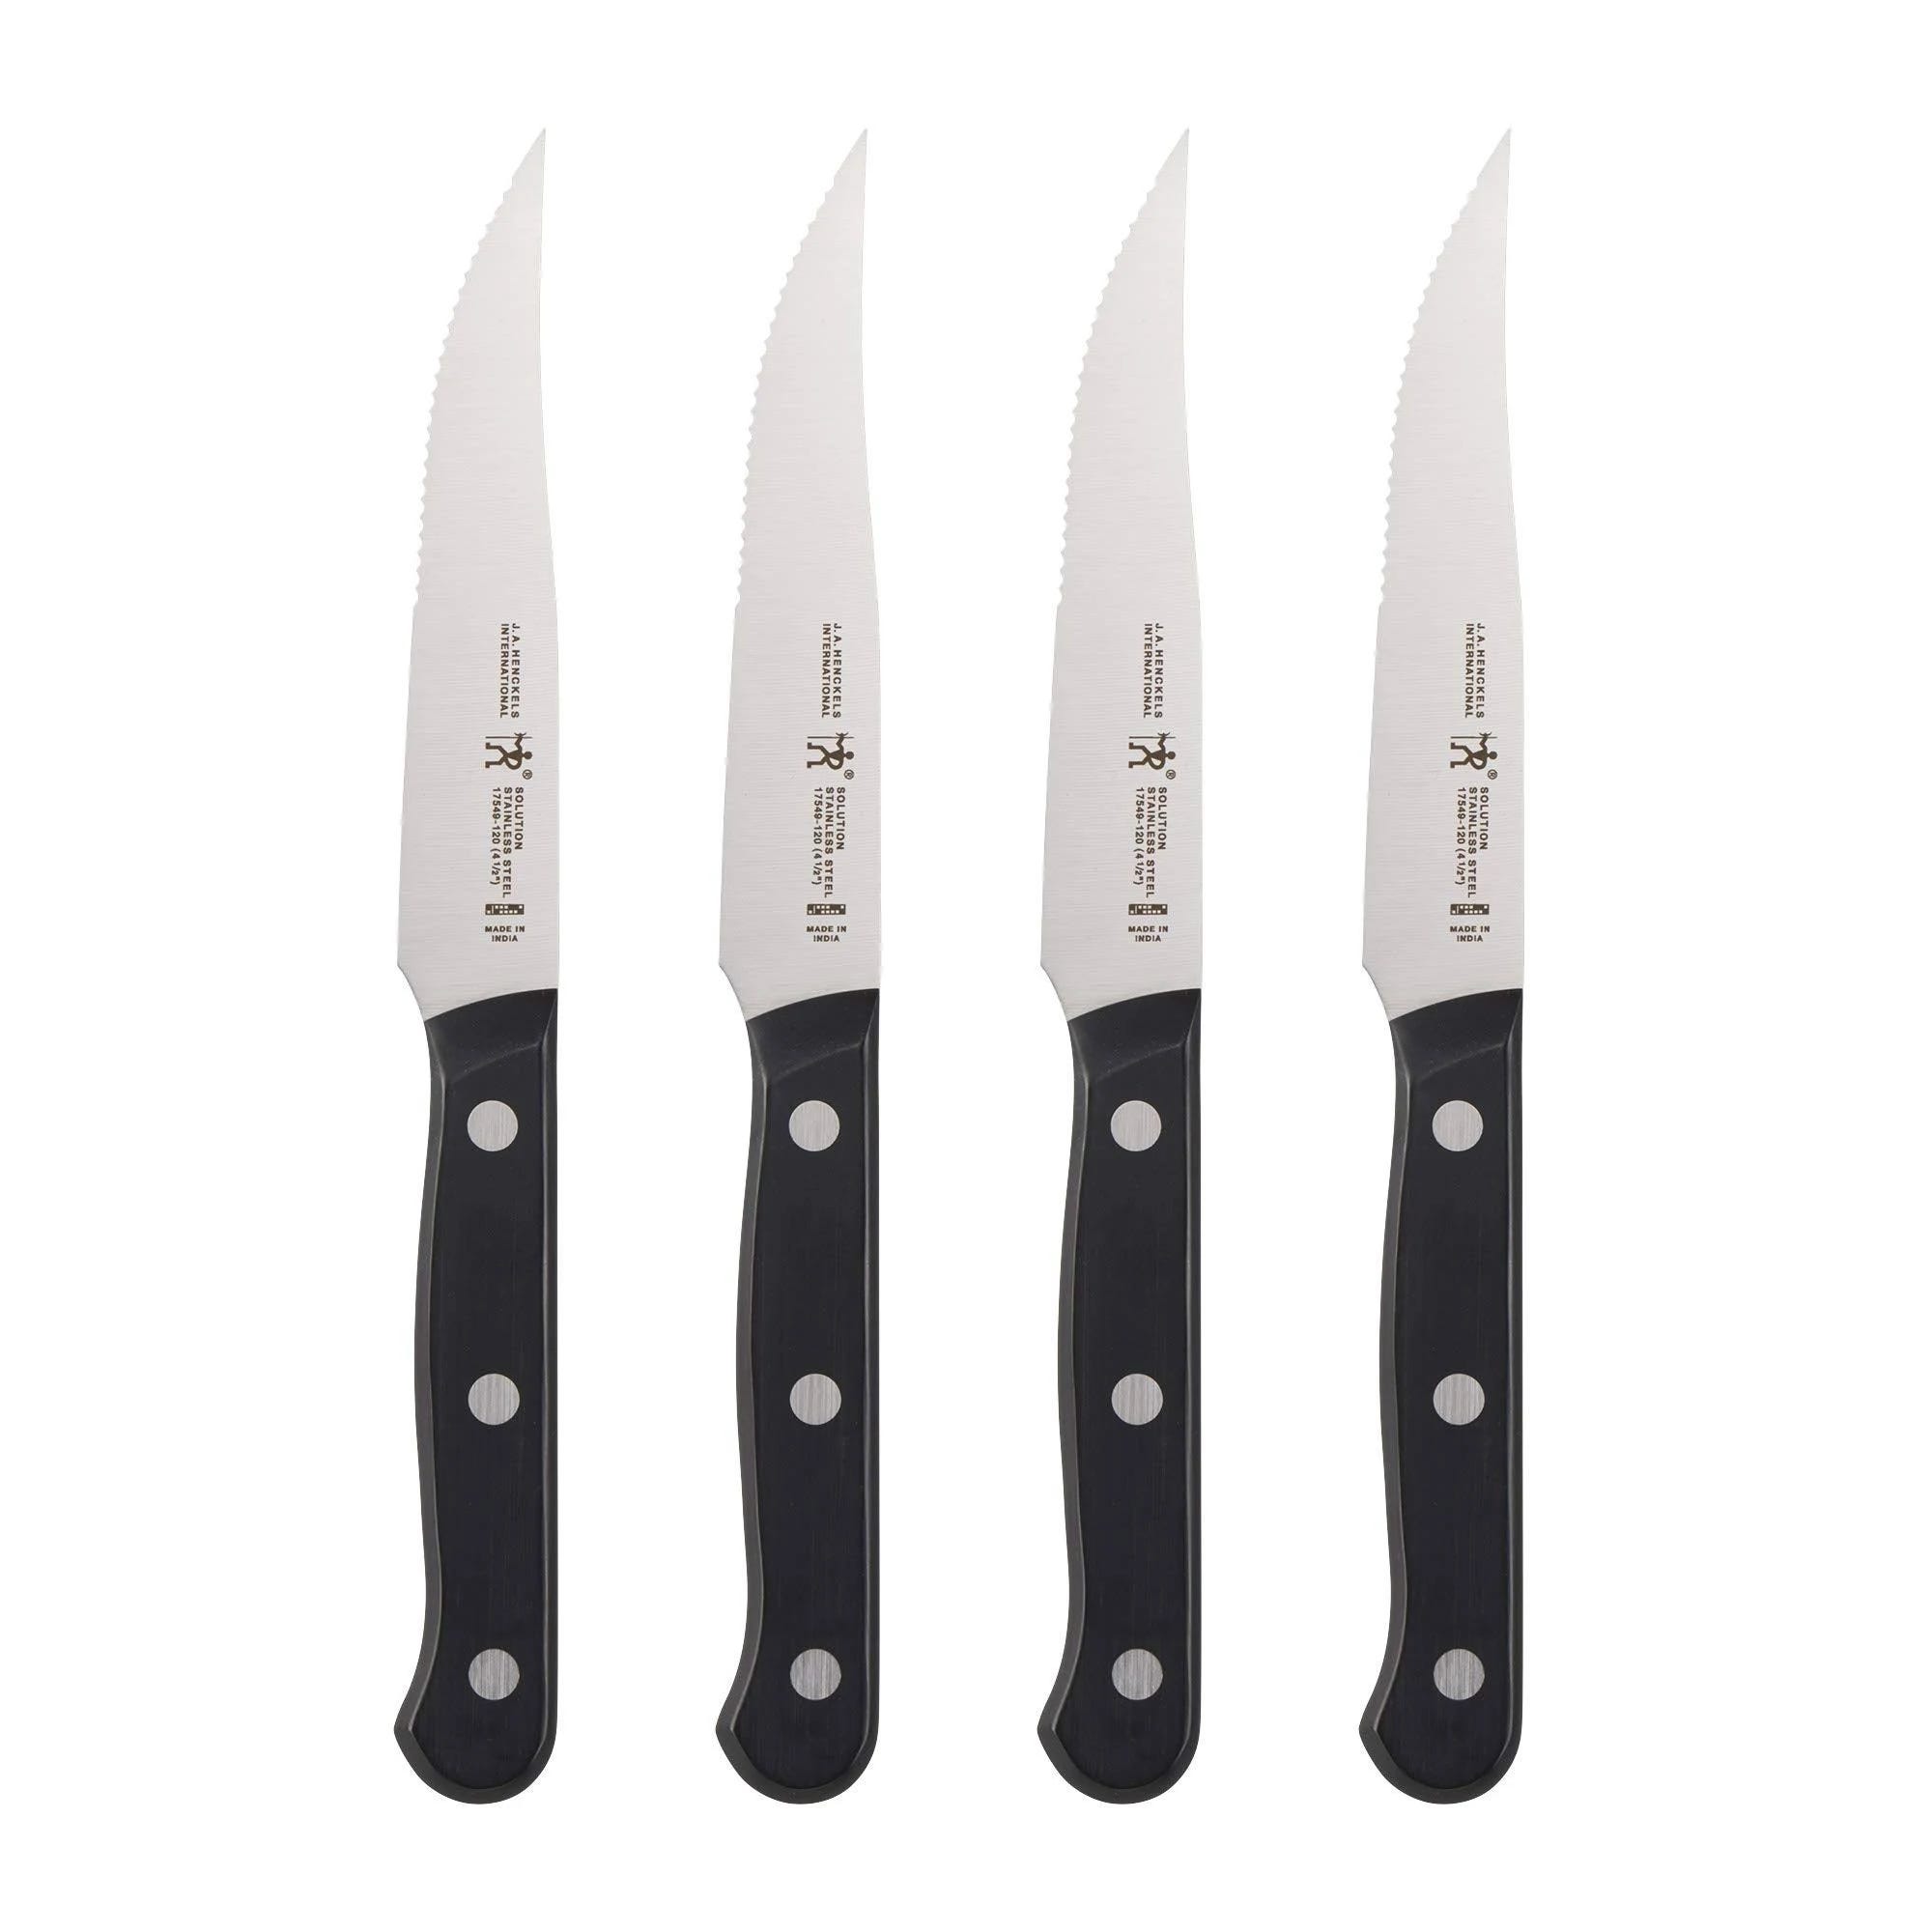 Henckels International 4-Piece Steak Knife Set - Professional Quality for Every Meal | Image